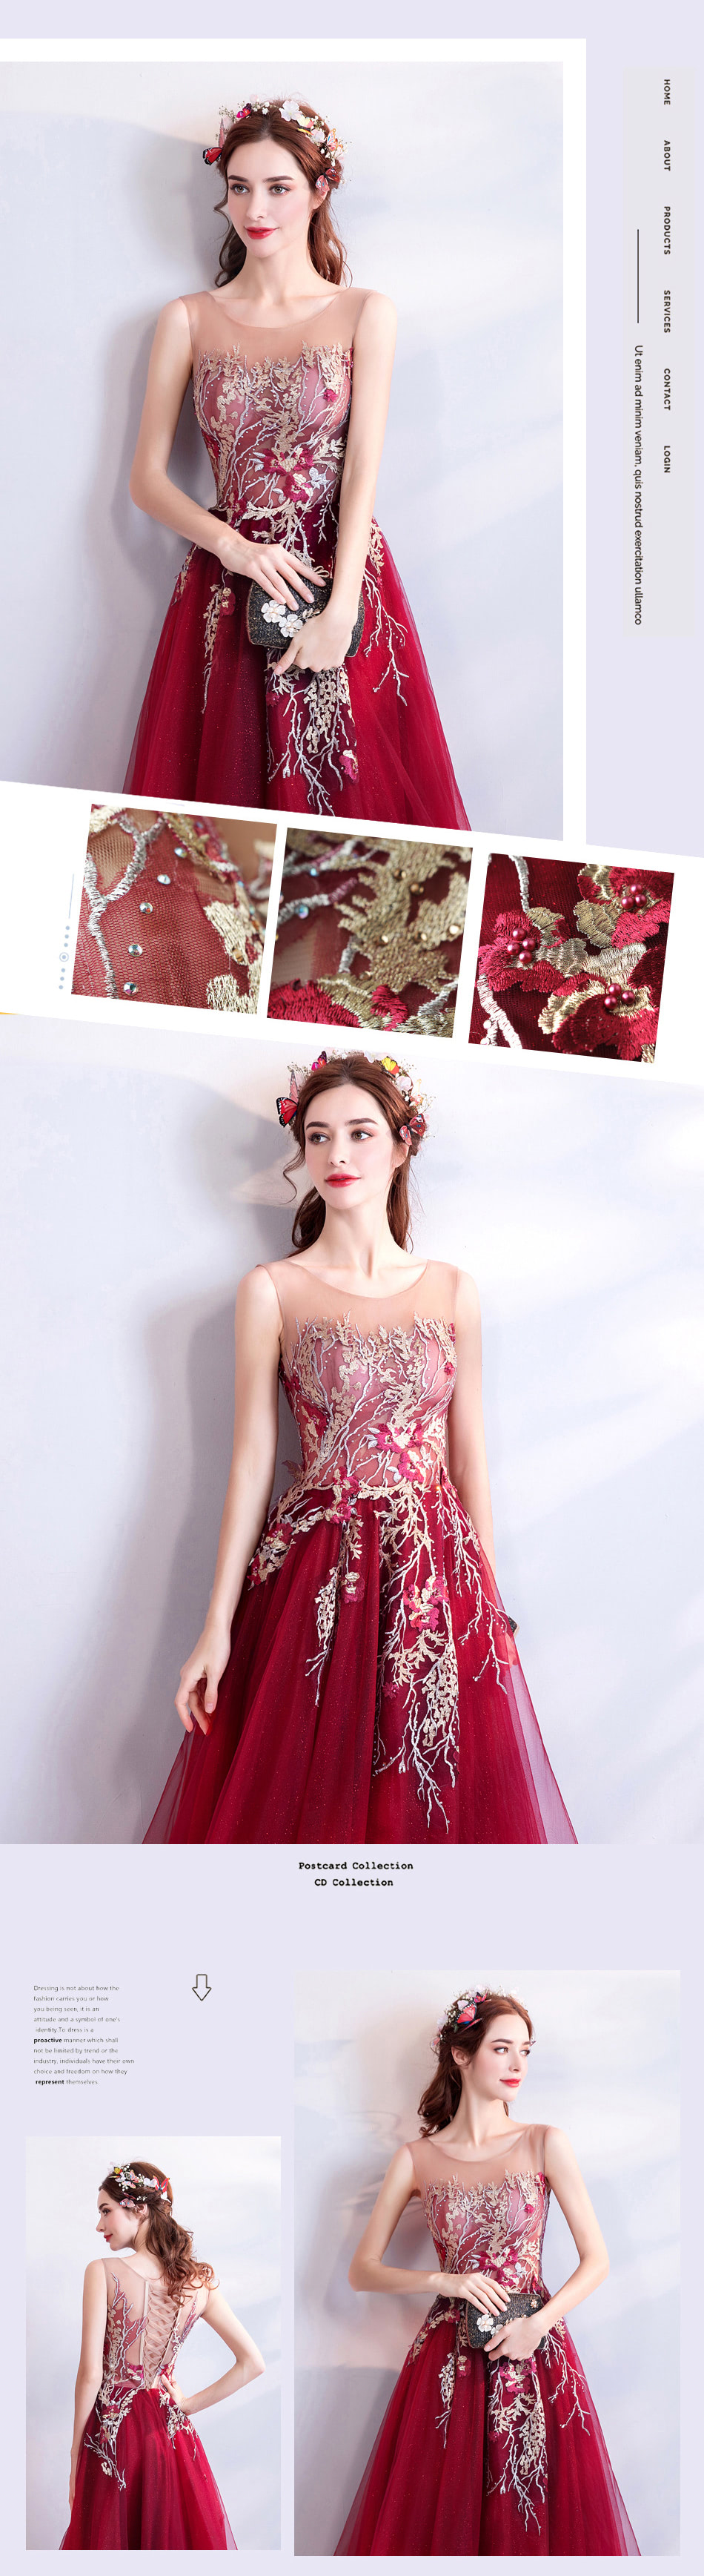 Gorgeous-Red-Couture-Dress-for-Wedding-Party-Prom-All-Occasions14.jpg